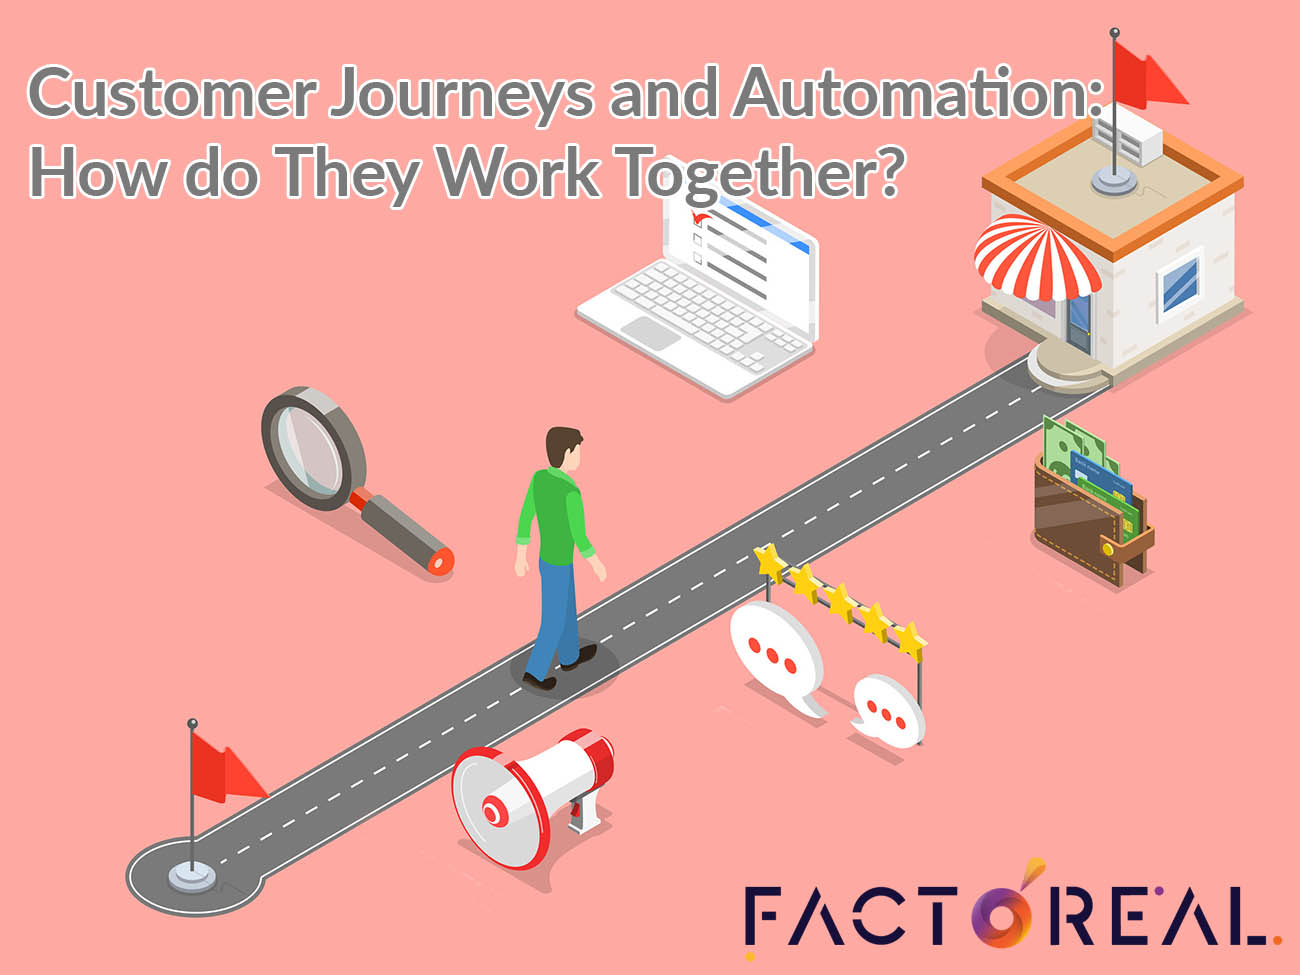 Customer Journeys and Automation: How do They Work Together?